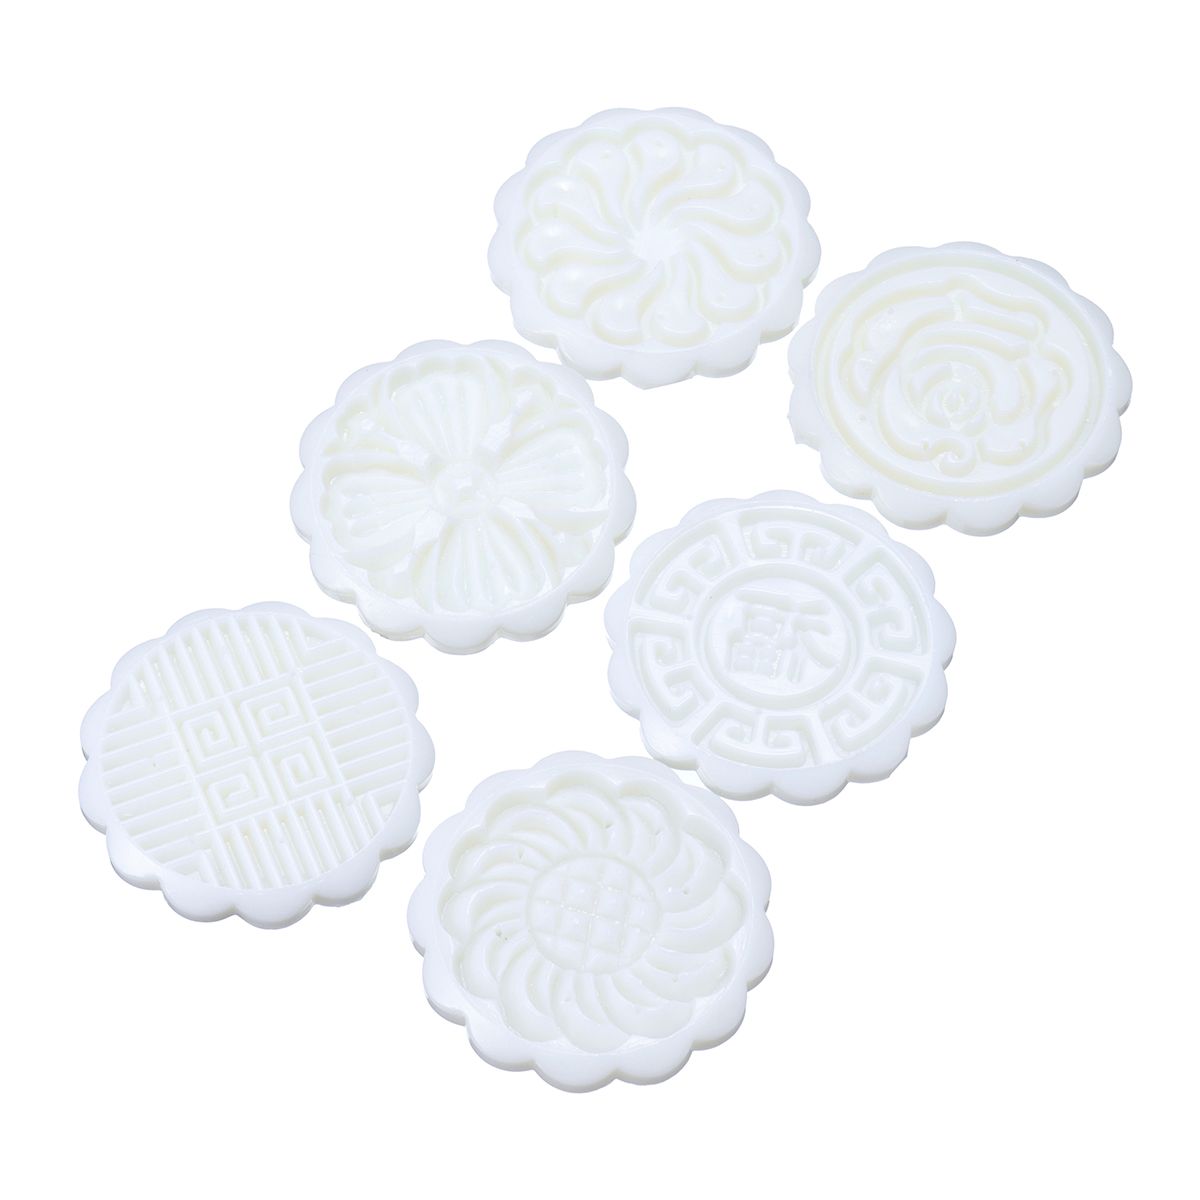 Round-Mooncake-Pastry-Mold-63g-Cookies-DIY-Press-Mould-Festival-Decor-w-6-Flower-Pattern-Stamps-1339041